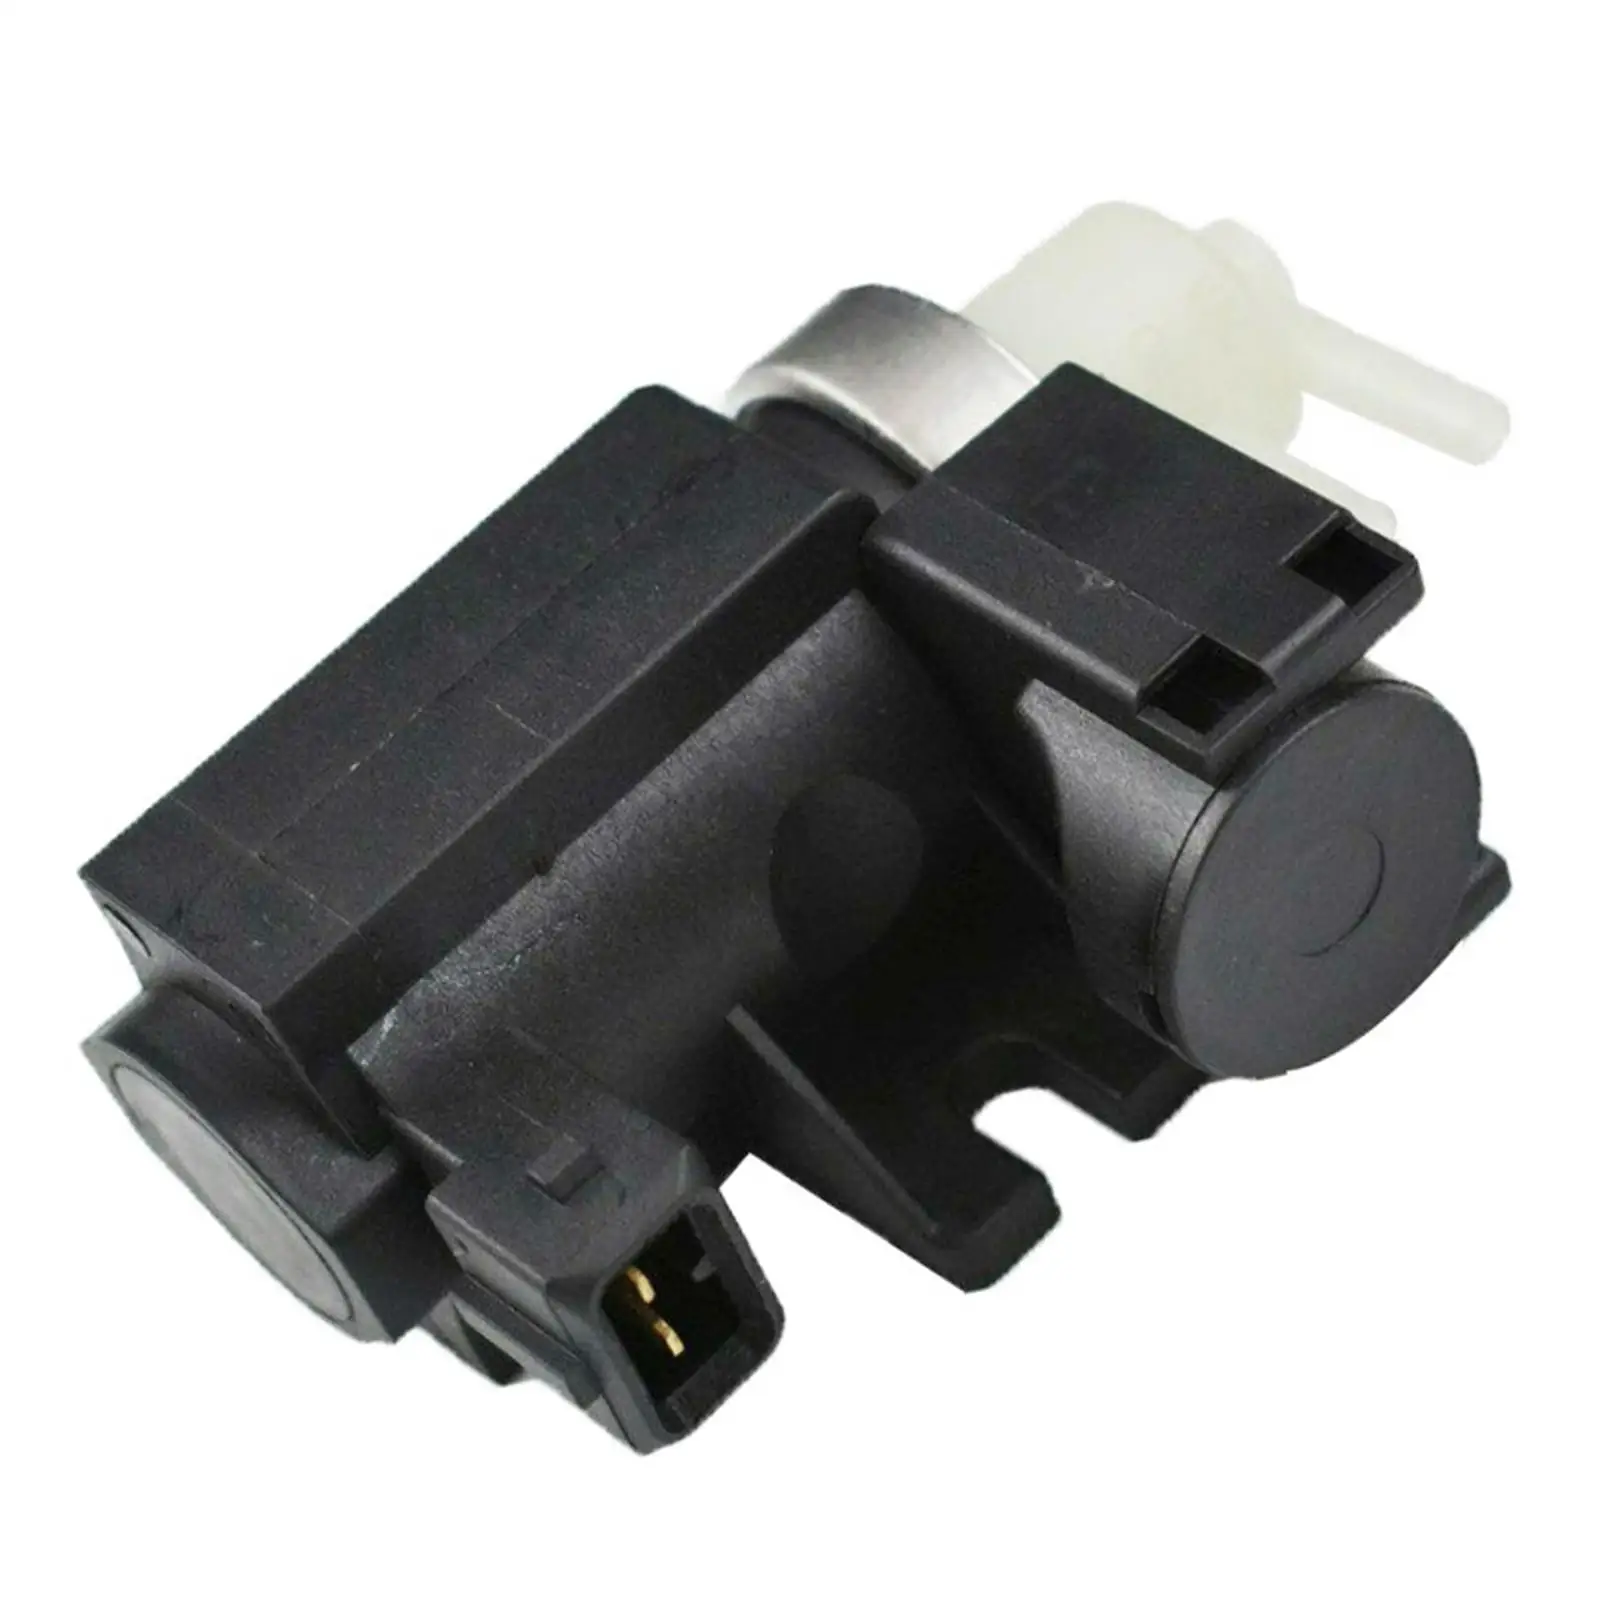 Automotive  Solenoid 11747626350 700887190 Pressure Converter Replacement Part 2 Pin for 35i